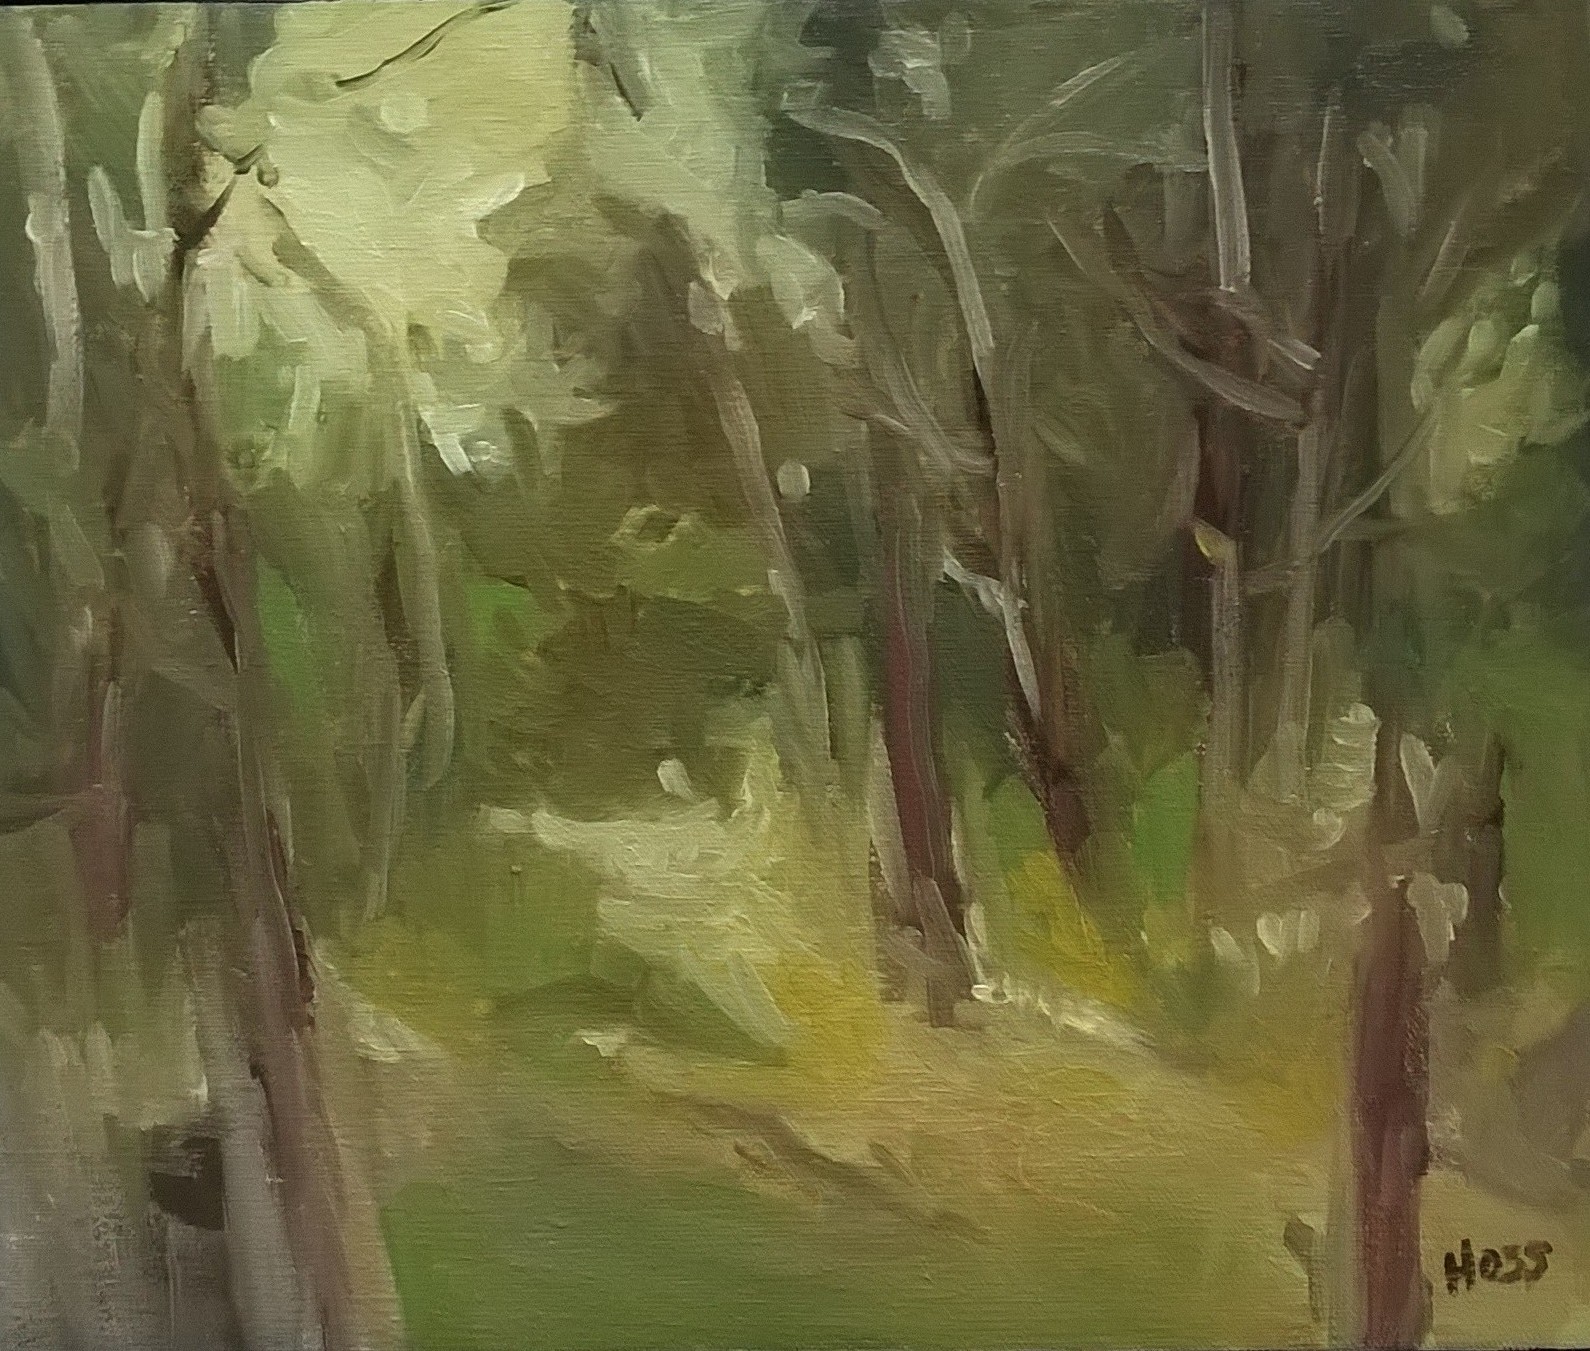 Into the Glen | Oil on Canvas, 12 x 10 in |  Sold